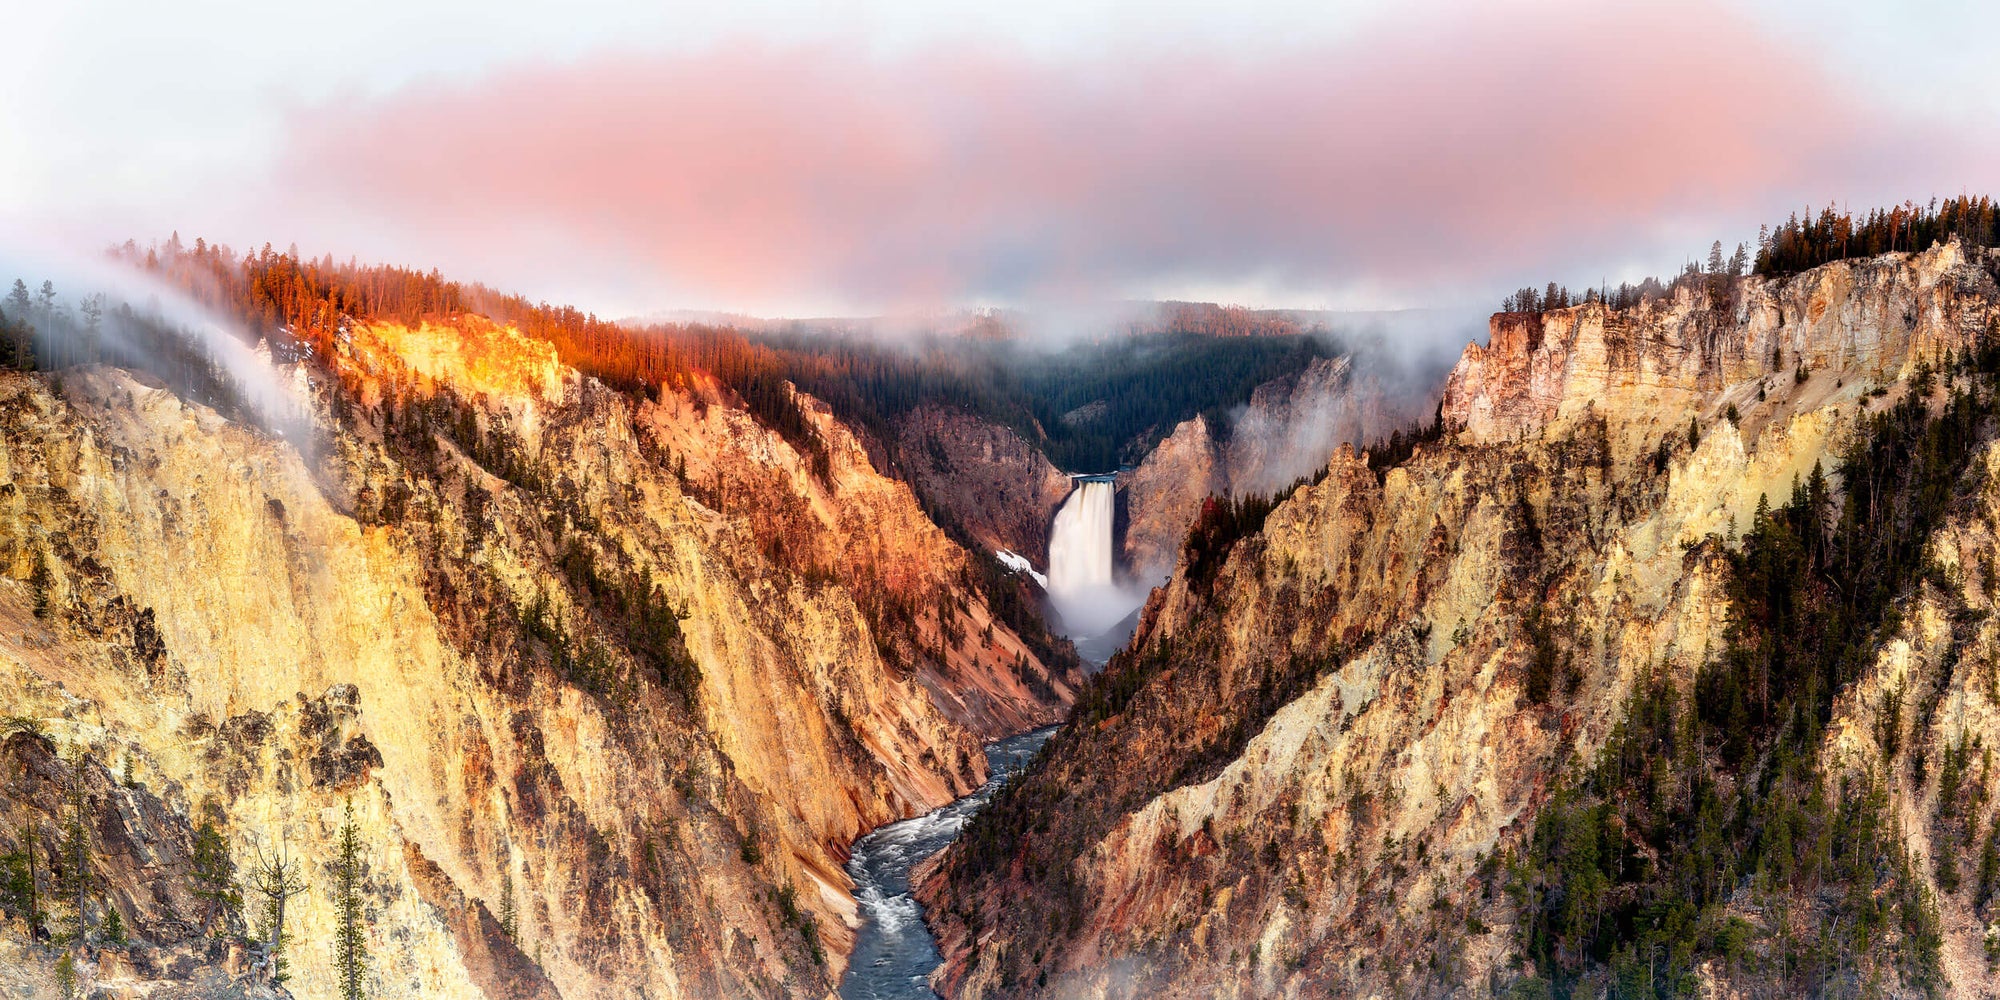 This piece of Yellowstone art shows the view from Artist Point into Yellowstone Canyon.